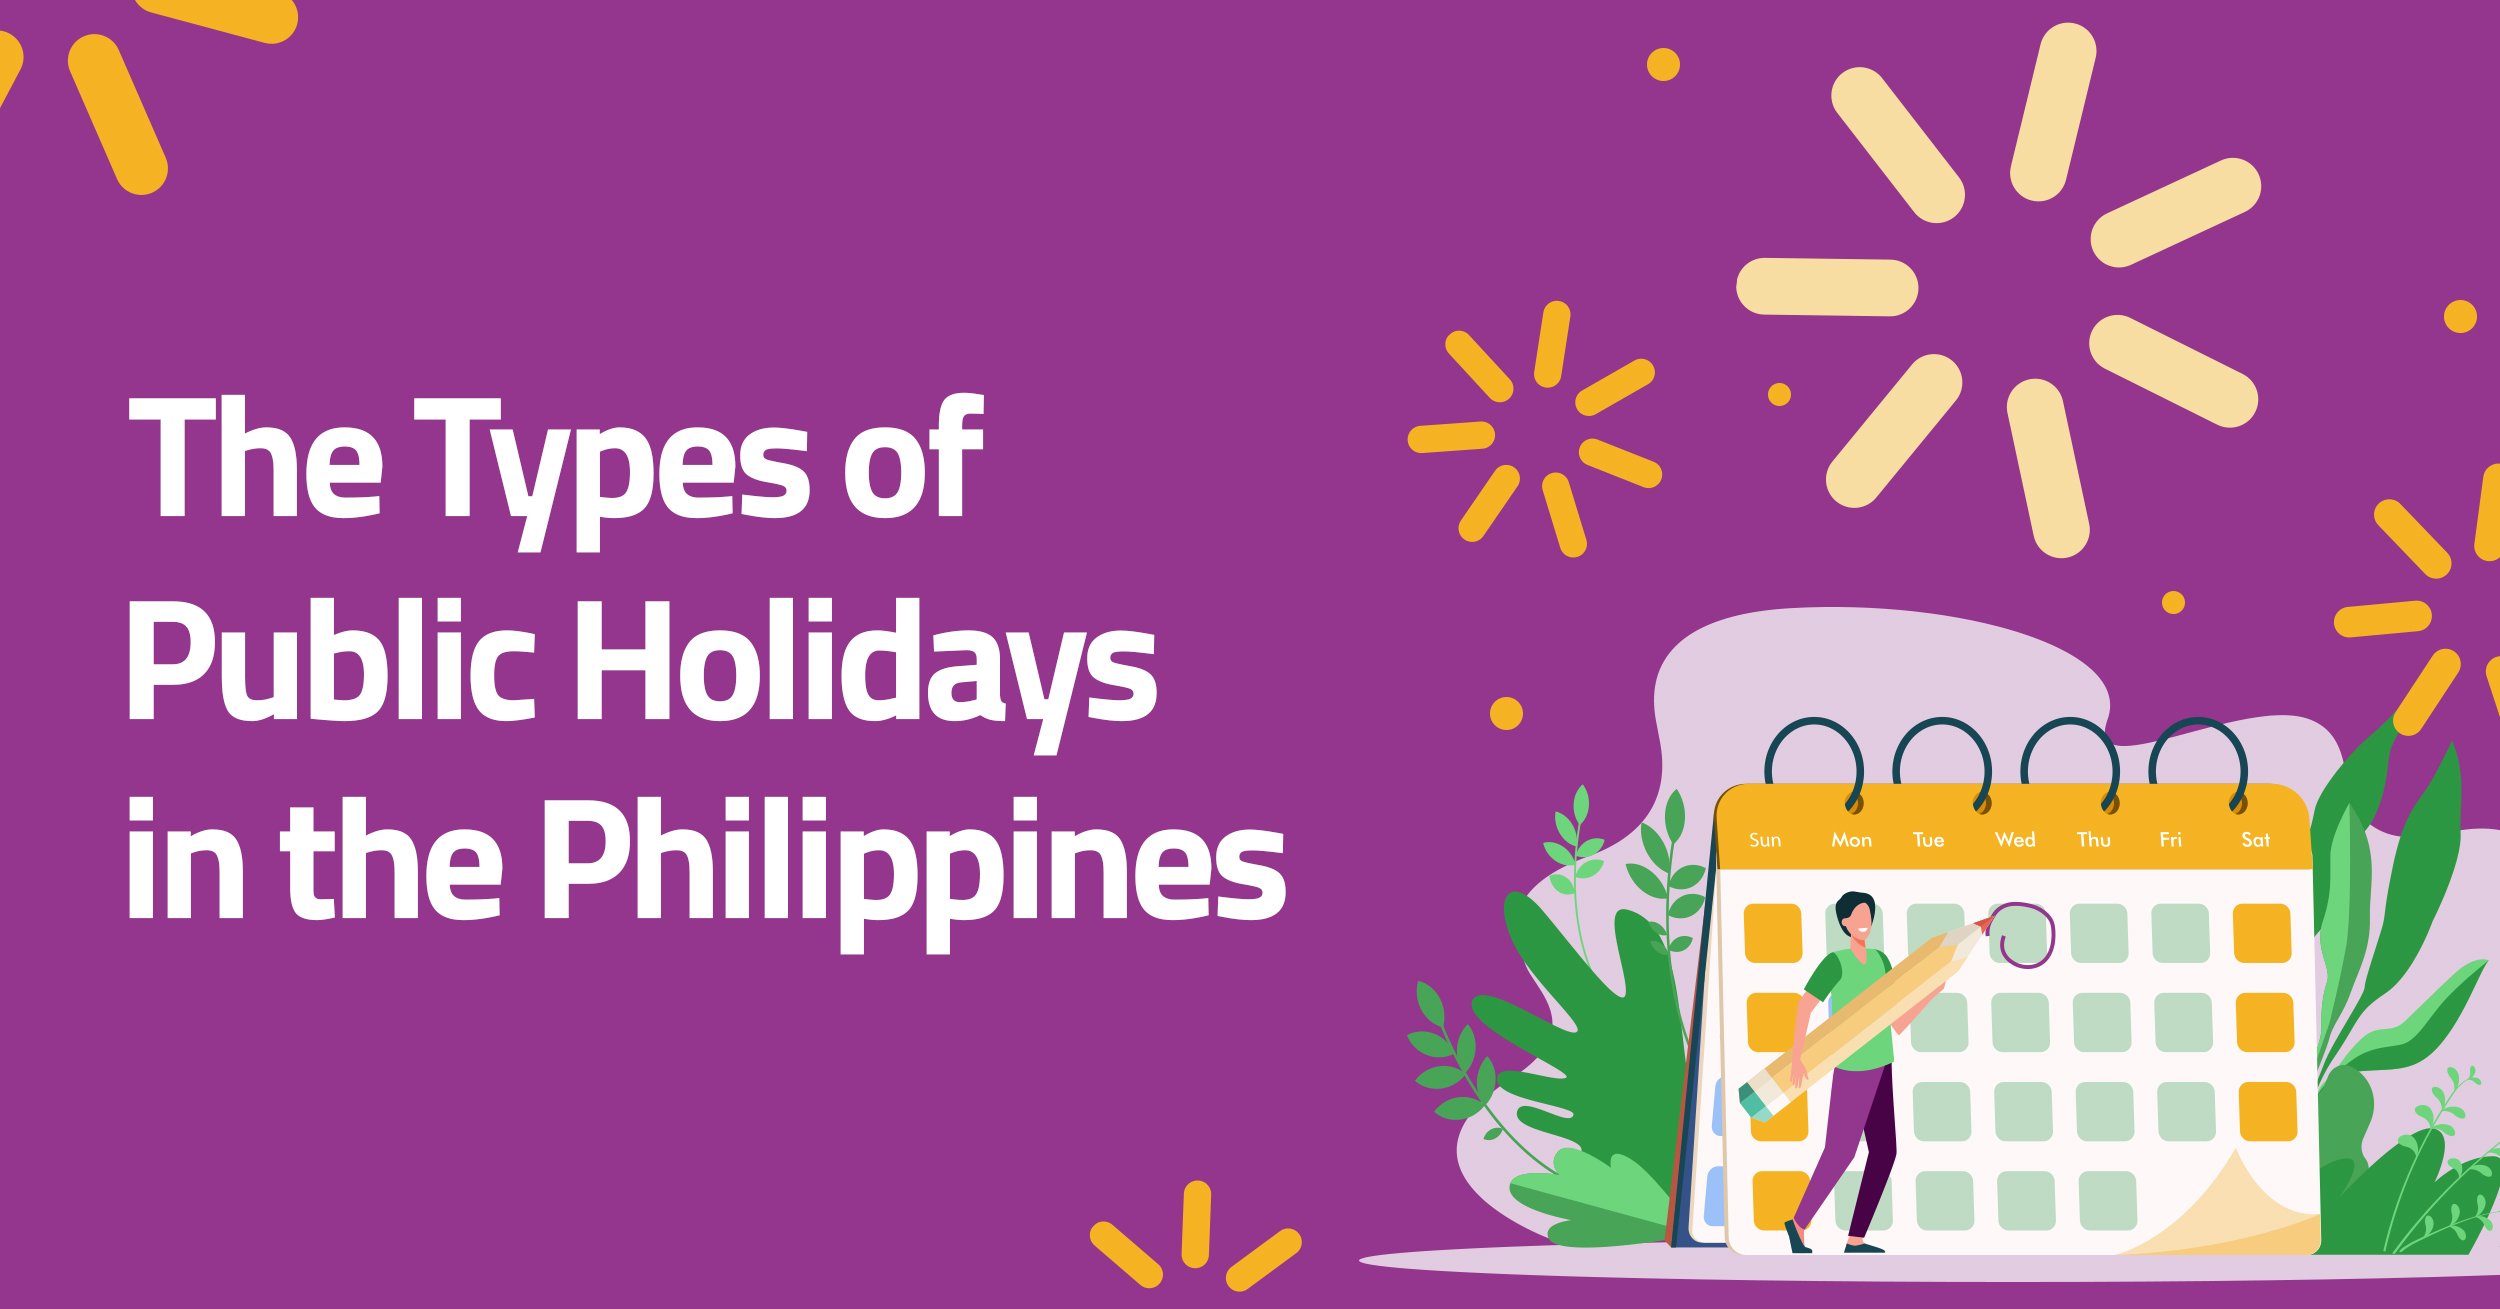 The Philippines and its Types of Public Holidays